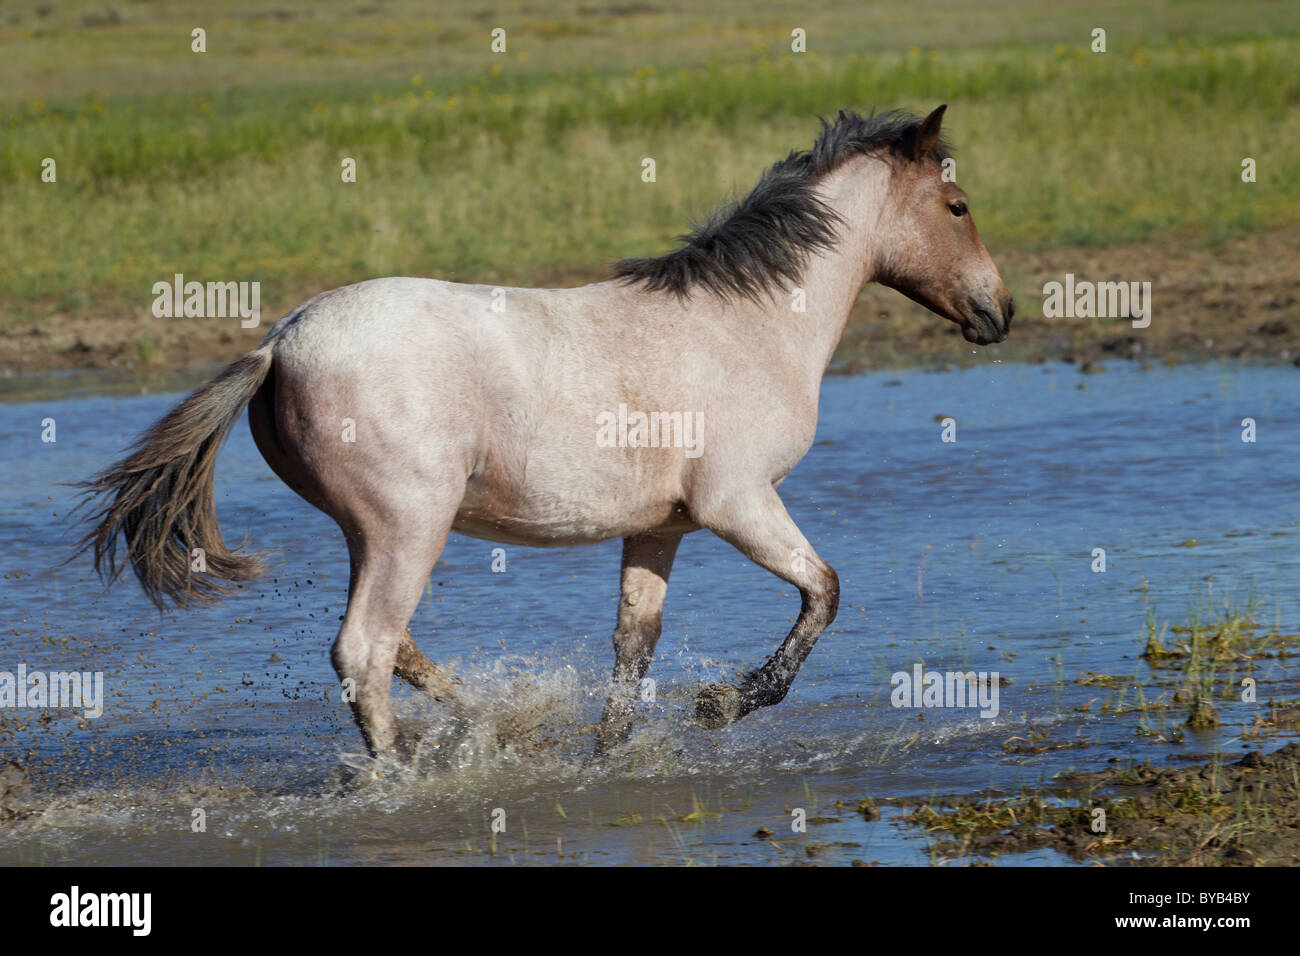 Wild Mustang Running in a Pond, Monero, New Mexico Stock Photo